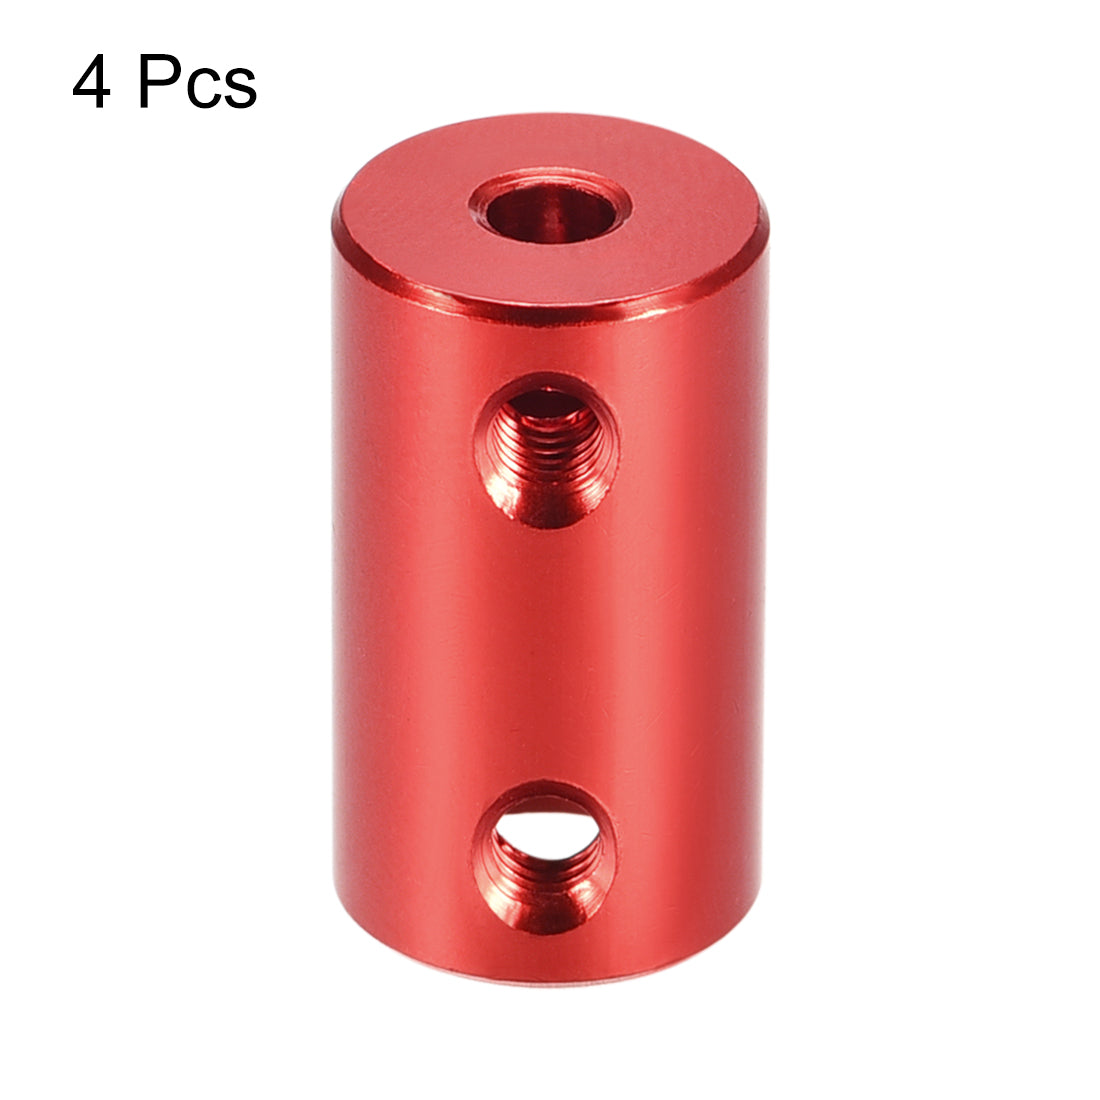 Uxcell Uxcell 3mm to 6mm Bore Rigid Coupling 25mm Length 14mm Diameter Aluminum Alloy Shaft Coupler Connector Red 4pcs